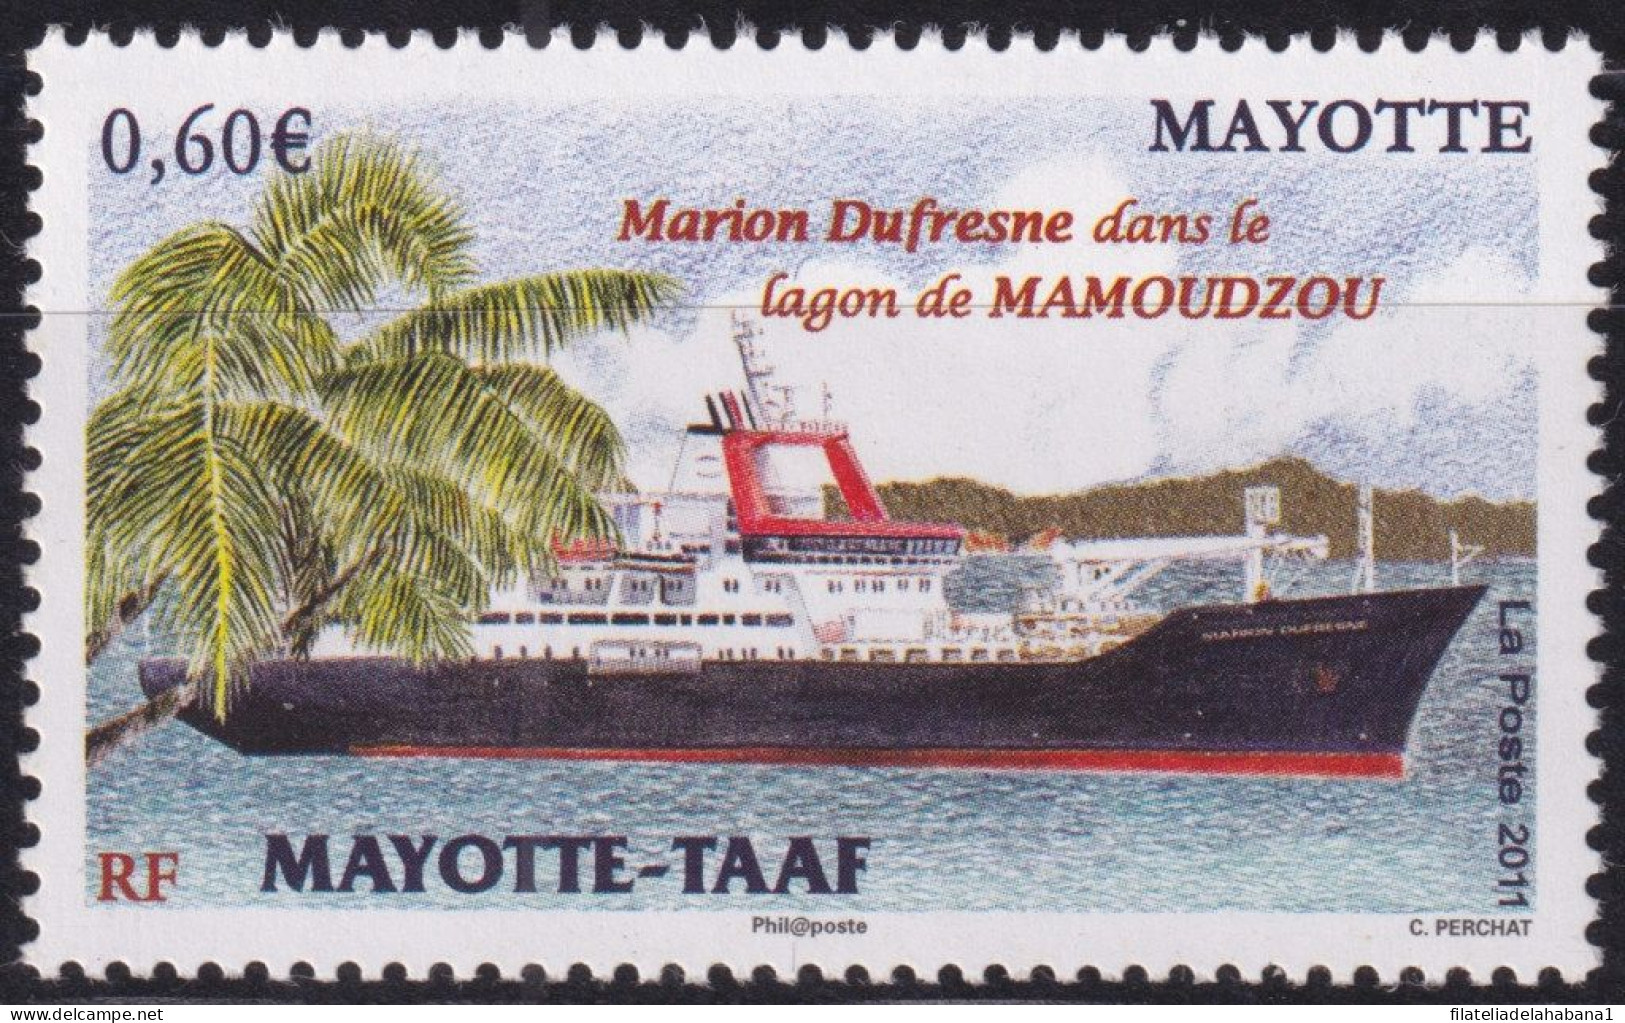 F-EX50357 TAAF MAYOTTE ANTARCTIC MNH 2011 MARION DUFRESNE SHIP.  - Ships